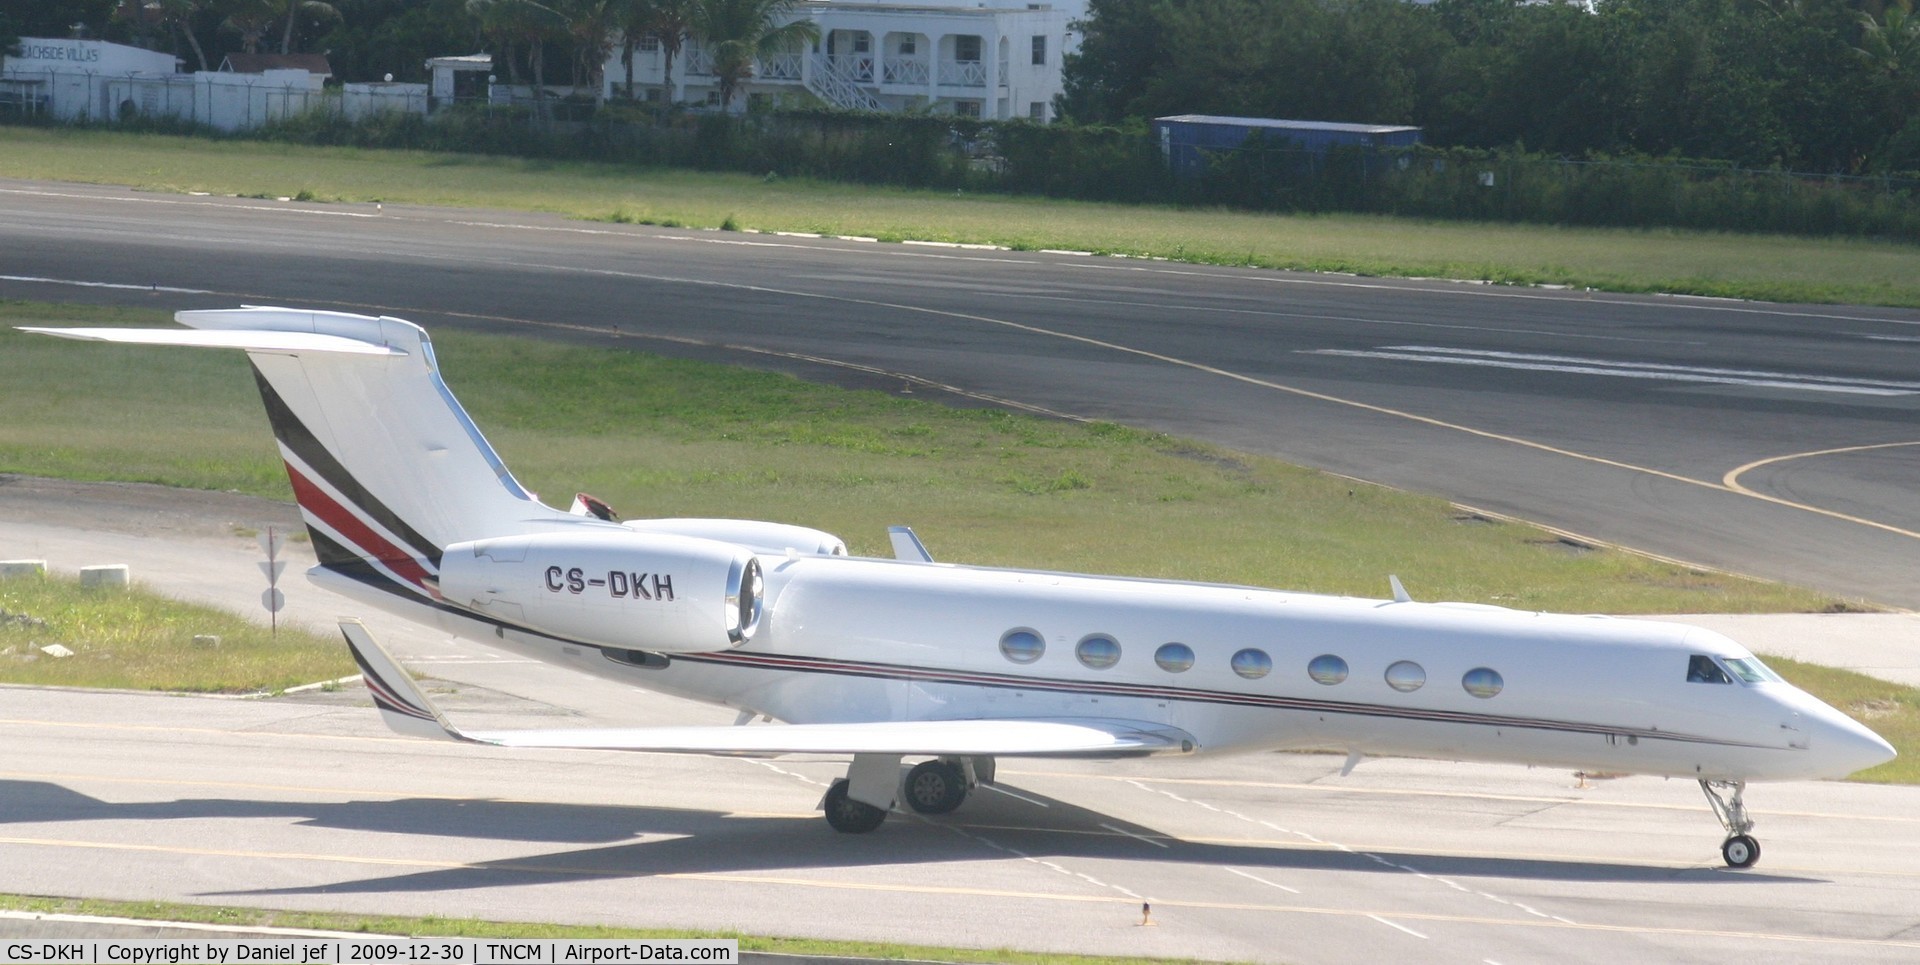 CS-DKH, 2007 Gulfstream Aerospace GV-SP (G550) C/N 5150, CS-DKH taxing to Alhpa for take off